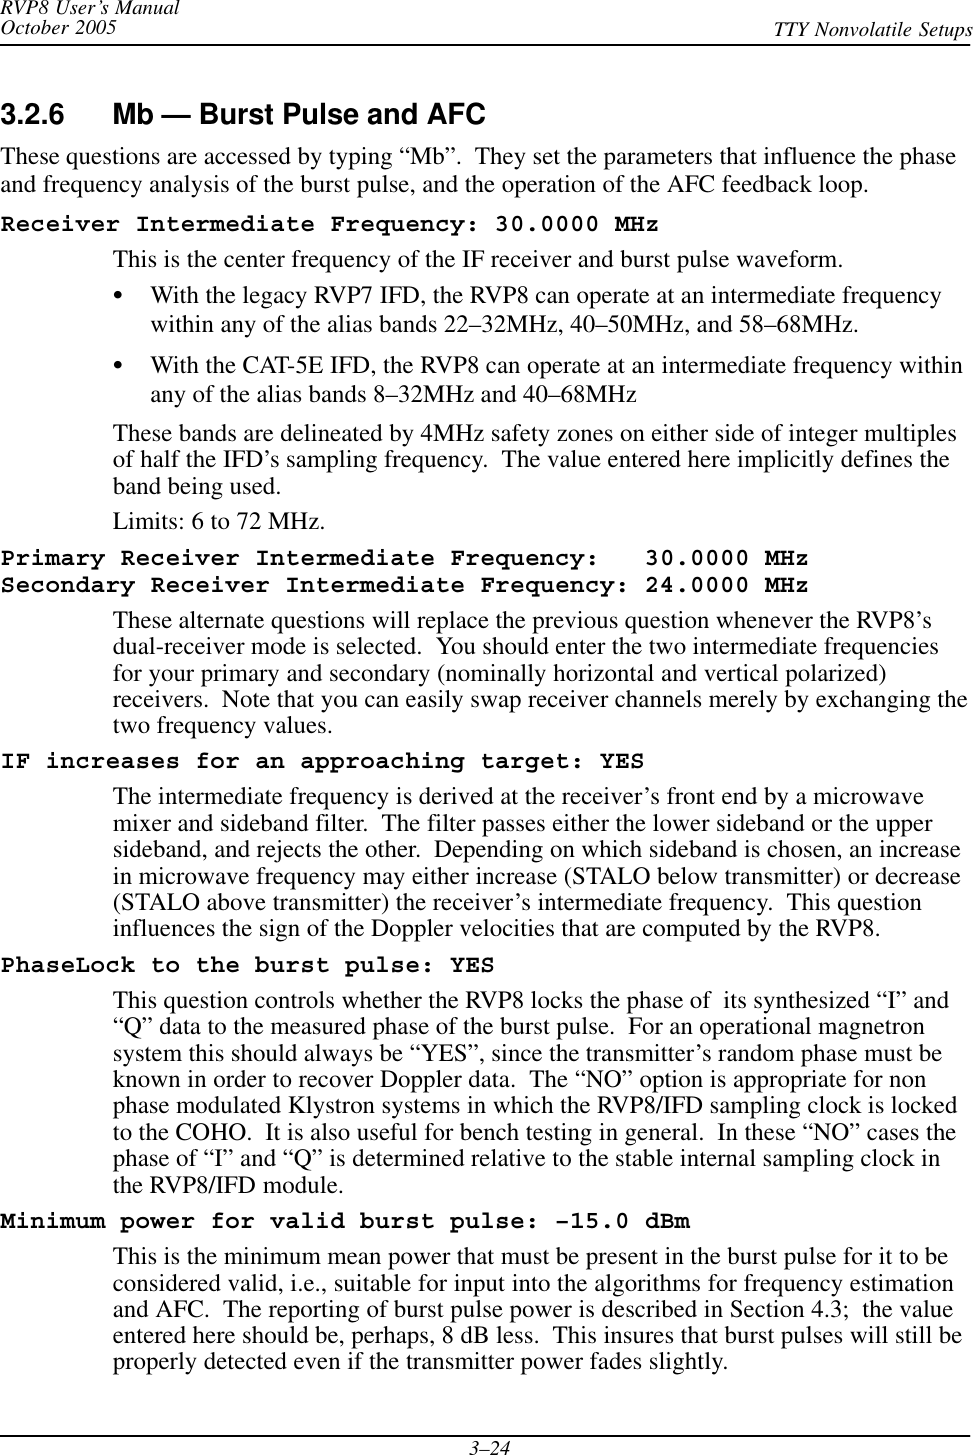 RVP8 User’s ManualOctober 2005 TTY Nonvolatile Setups3–243.2.6 Mb — Burst Pulse and AFCThese questions are accessed by typing “Mb”.  They set the parameters that influence the phaseand frequency analysis of the burst pulse, and the operation of the AFC feedback loop.Receiver Intermediate Frequency: 30.0000 MHzThis is the center frequency of the IF receiver and burst pulse waveform.SWith the legacy RVP7 IFD, the RVP8 can operate at an intermediate frequencywithin any of the alias bands 22–32MHz, 40–50MHz, and 58–68MHz.SWith the CAT-5E IFD, the RVP8 can operate at an intermediate frequency withinany of the alias bands 8–32MHz and 40–68MHzThese bands are delineated by 4MHz safety zones on either side of integer multiplesof half the IFD’s sampling frequency.  The value entered here implicitly defines theband being used.Limits: 6 to 72 MHz.Primary Receiver Intermediate Frequency:   30.0000 MHzSecondary Receiver Intermediate Frequency: 24.0000 MHzThese alternate questions will replace the previous question whenever the RVP8’sdual-receiver mode is selected.  You should enter the two intermediate frequenciesfor your primary and secondary (nominally horizontal and vertical polarized)receivers.  Note that you can easily swap receiver channels merely by exchanging thetwo frequency values.IF increases for an approaching target: YESThe intermediate frequency is derived at the receiver’s front end by a microwavemixer and sideband filter.  The filter passes either the lower sideband or the uppersideband, and rejects the other.  Depending on which sideband is chosen, an increasein microwave frequency may either increase (STALO below transmitter) or decrease(STALO above transmitter) the receiver’s intermediate frequency.  This questioninfluences the sign of the Doppler velocities that are computed by the RVP8.PhaseLock to the burst pulse: YESThis question controls whether the RVP8 locks the phase of  its synthesized “I” and“Q” data to the measured phase of the burst pulse.  For an operational magnetronsystem this should always be “YES”, since the transmitter’s random phase must beknown in order to recover Doppler data.  The “NO” option is appropriate for nonphase modulated Klystron systems in which the RVP8/IFD sampling clock is lockedto the COHO.  It is also useful for bench testing in general.  In these “NO” cases thephase of “I” and “Q” is determined relative to the stable internal sampling clock inthe RVP8/IFD module.Minimum power for valid burst pulse: –15.0 dBmThis is the minimum mean power that must be present in the burst pulse for it to beconsidered valid, i.e., suitable for input into the algorithms for frequency estimationand AFC.  The reporting of burst pulse power is described in Section 4.3;  the valueentered here should be, perhaps, 8 dB less.  This insures that burst pulses will still beproperly detected even if the transmitter power fades slightly.